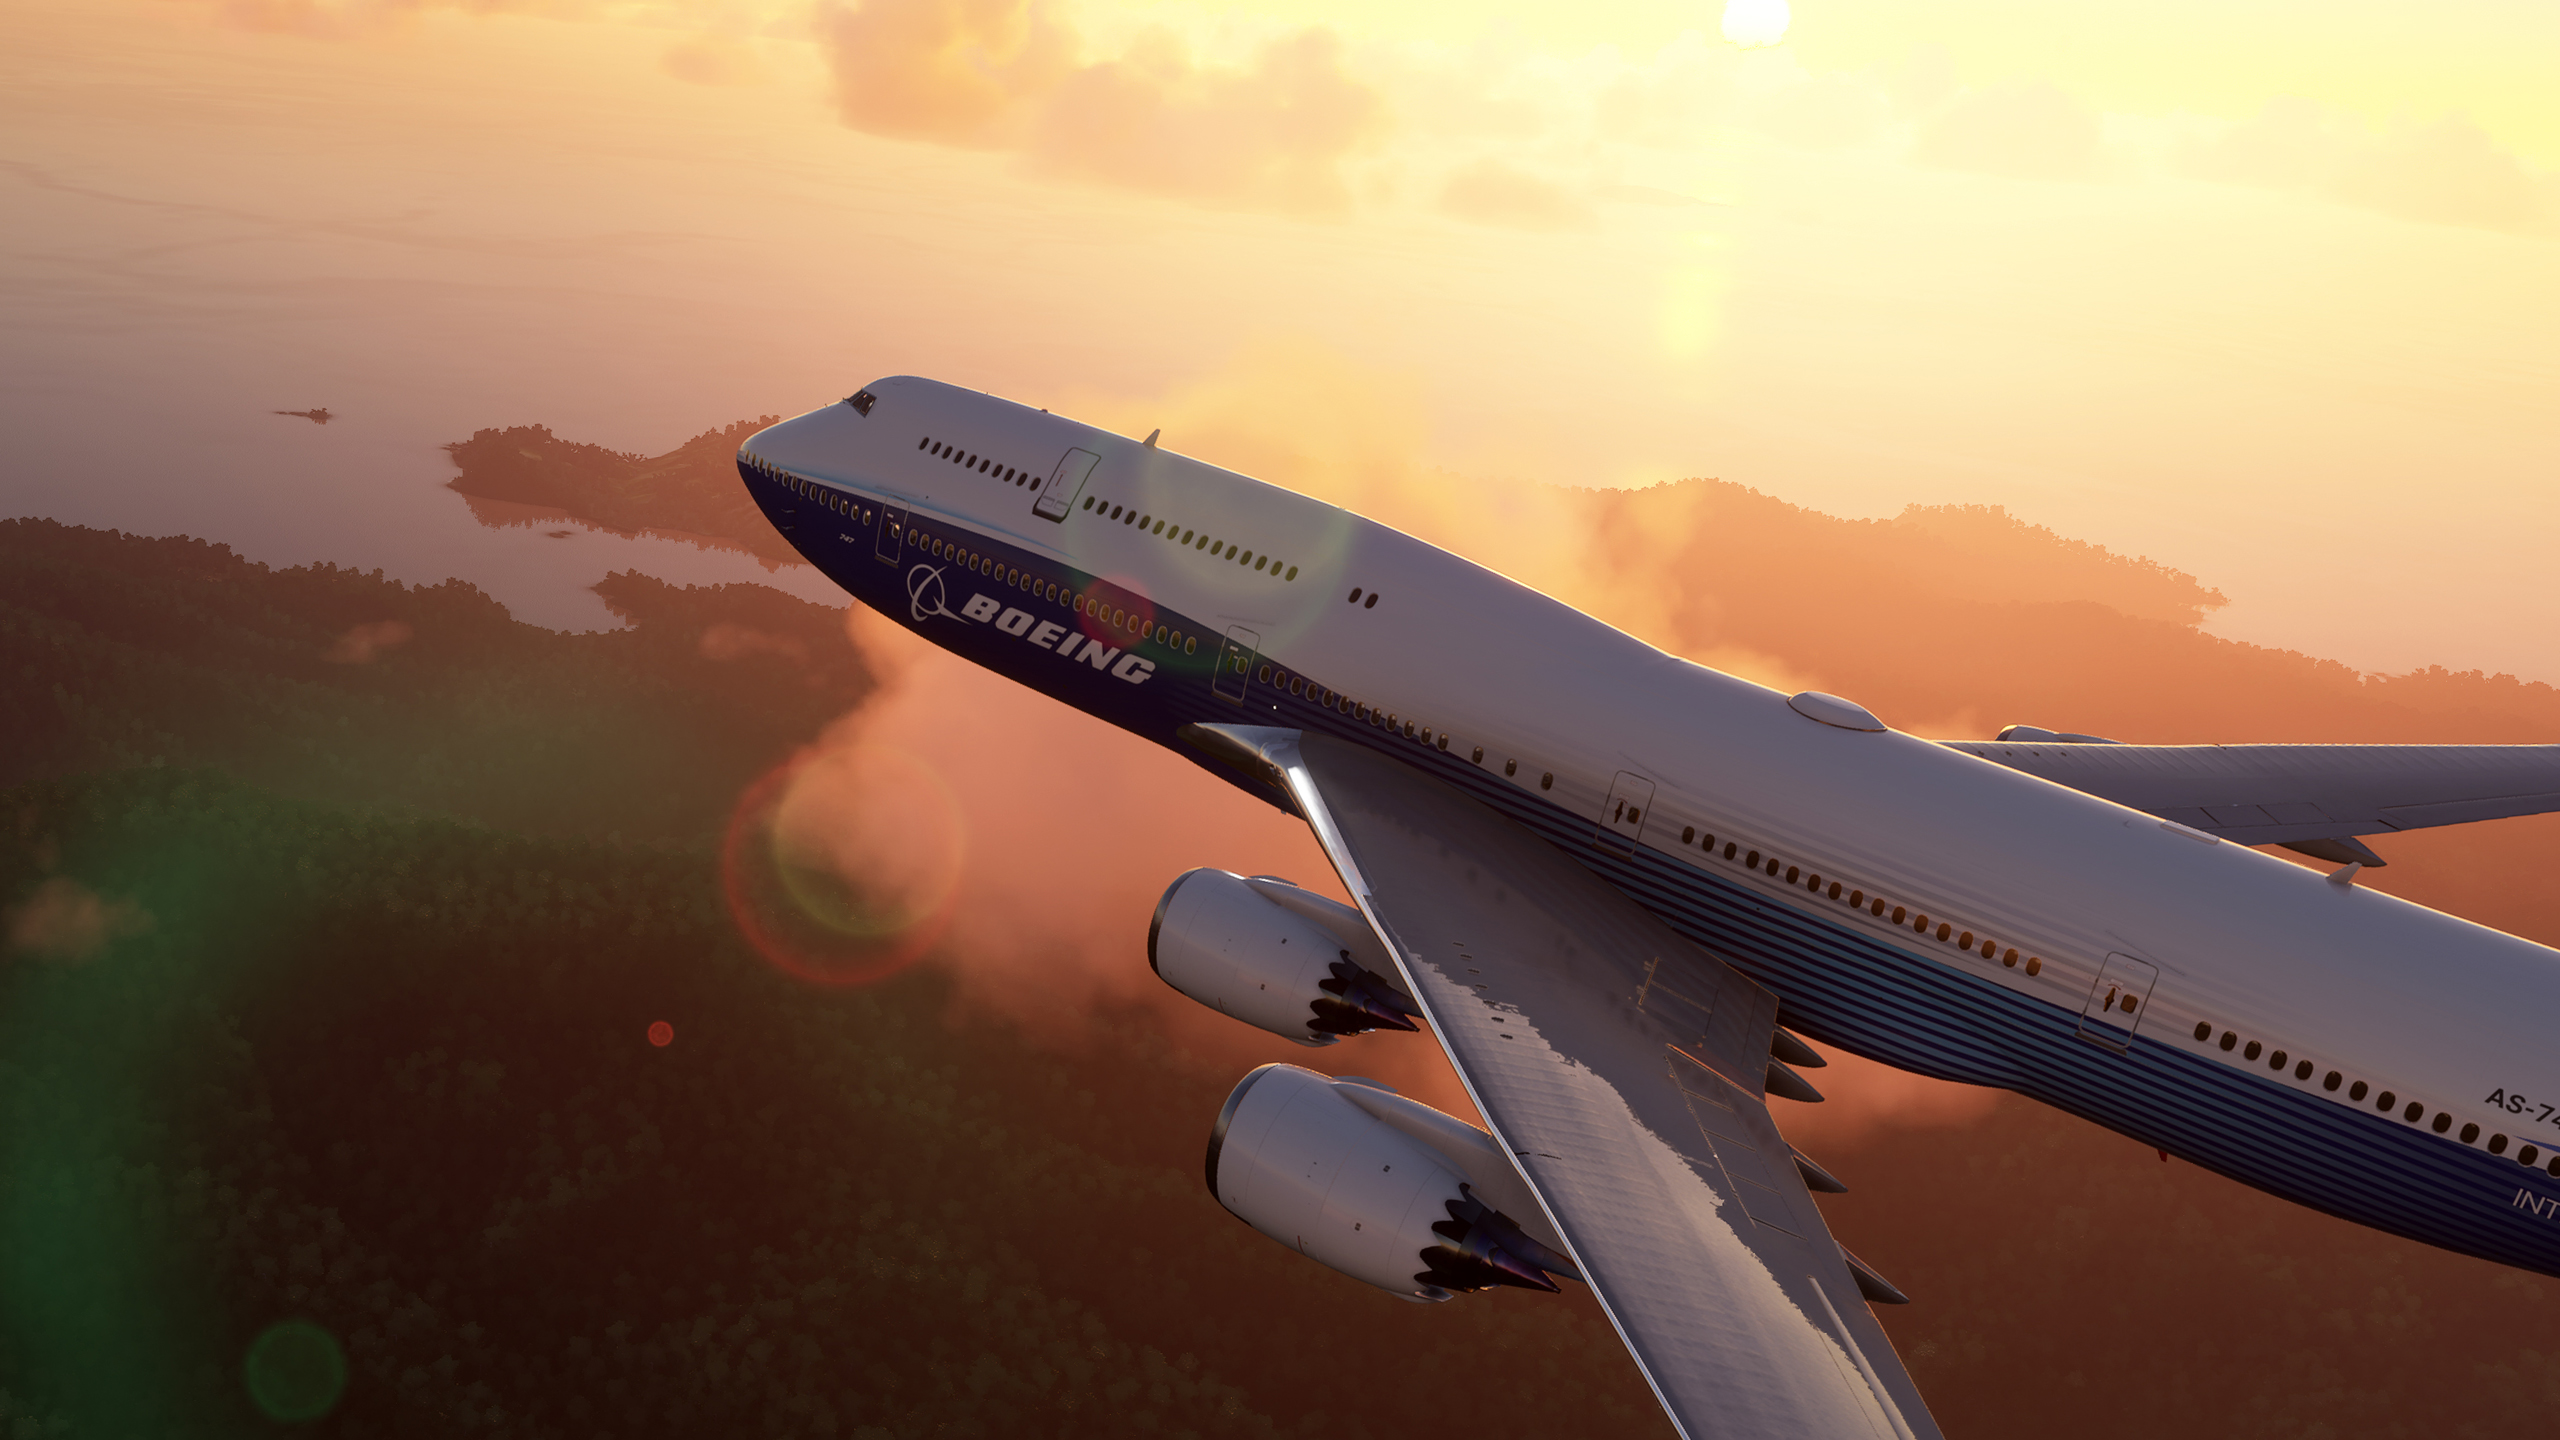  Microsoft Flight Simulator review in progress: A fantastic landmark with some issues you should know about 